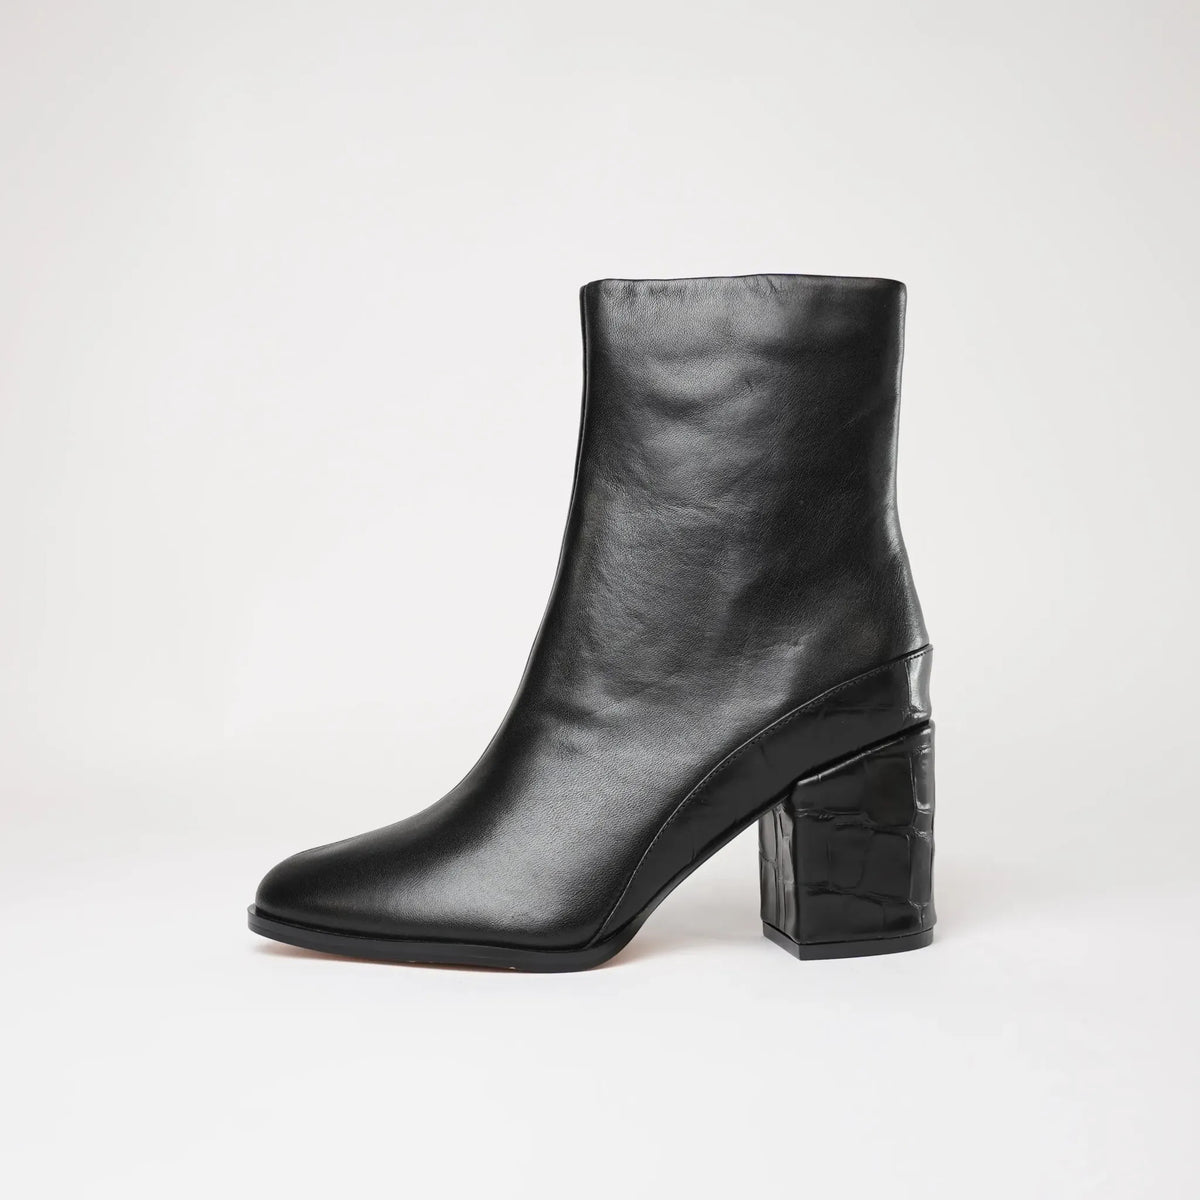 Cash Black Leather Ankle Boots